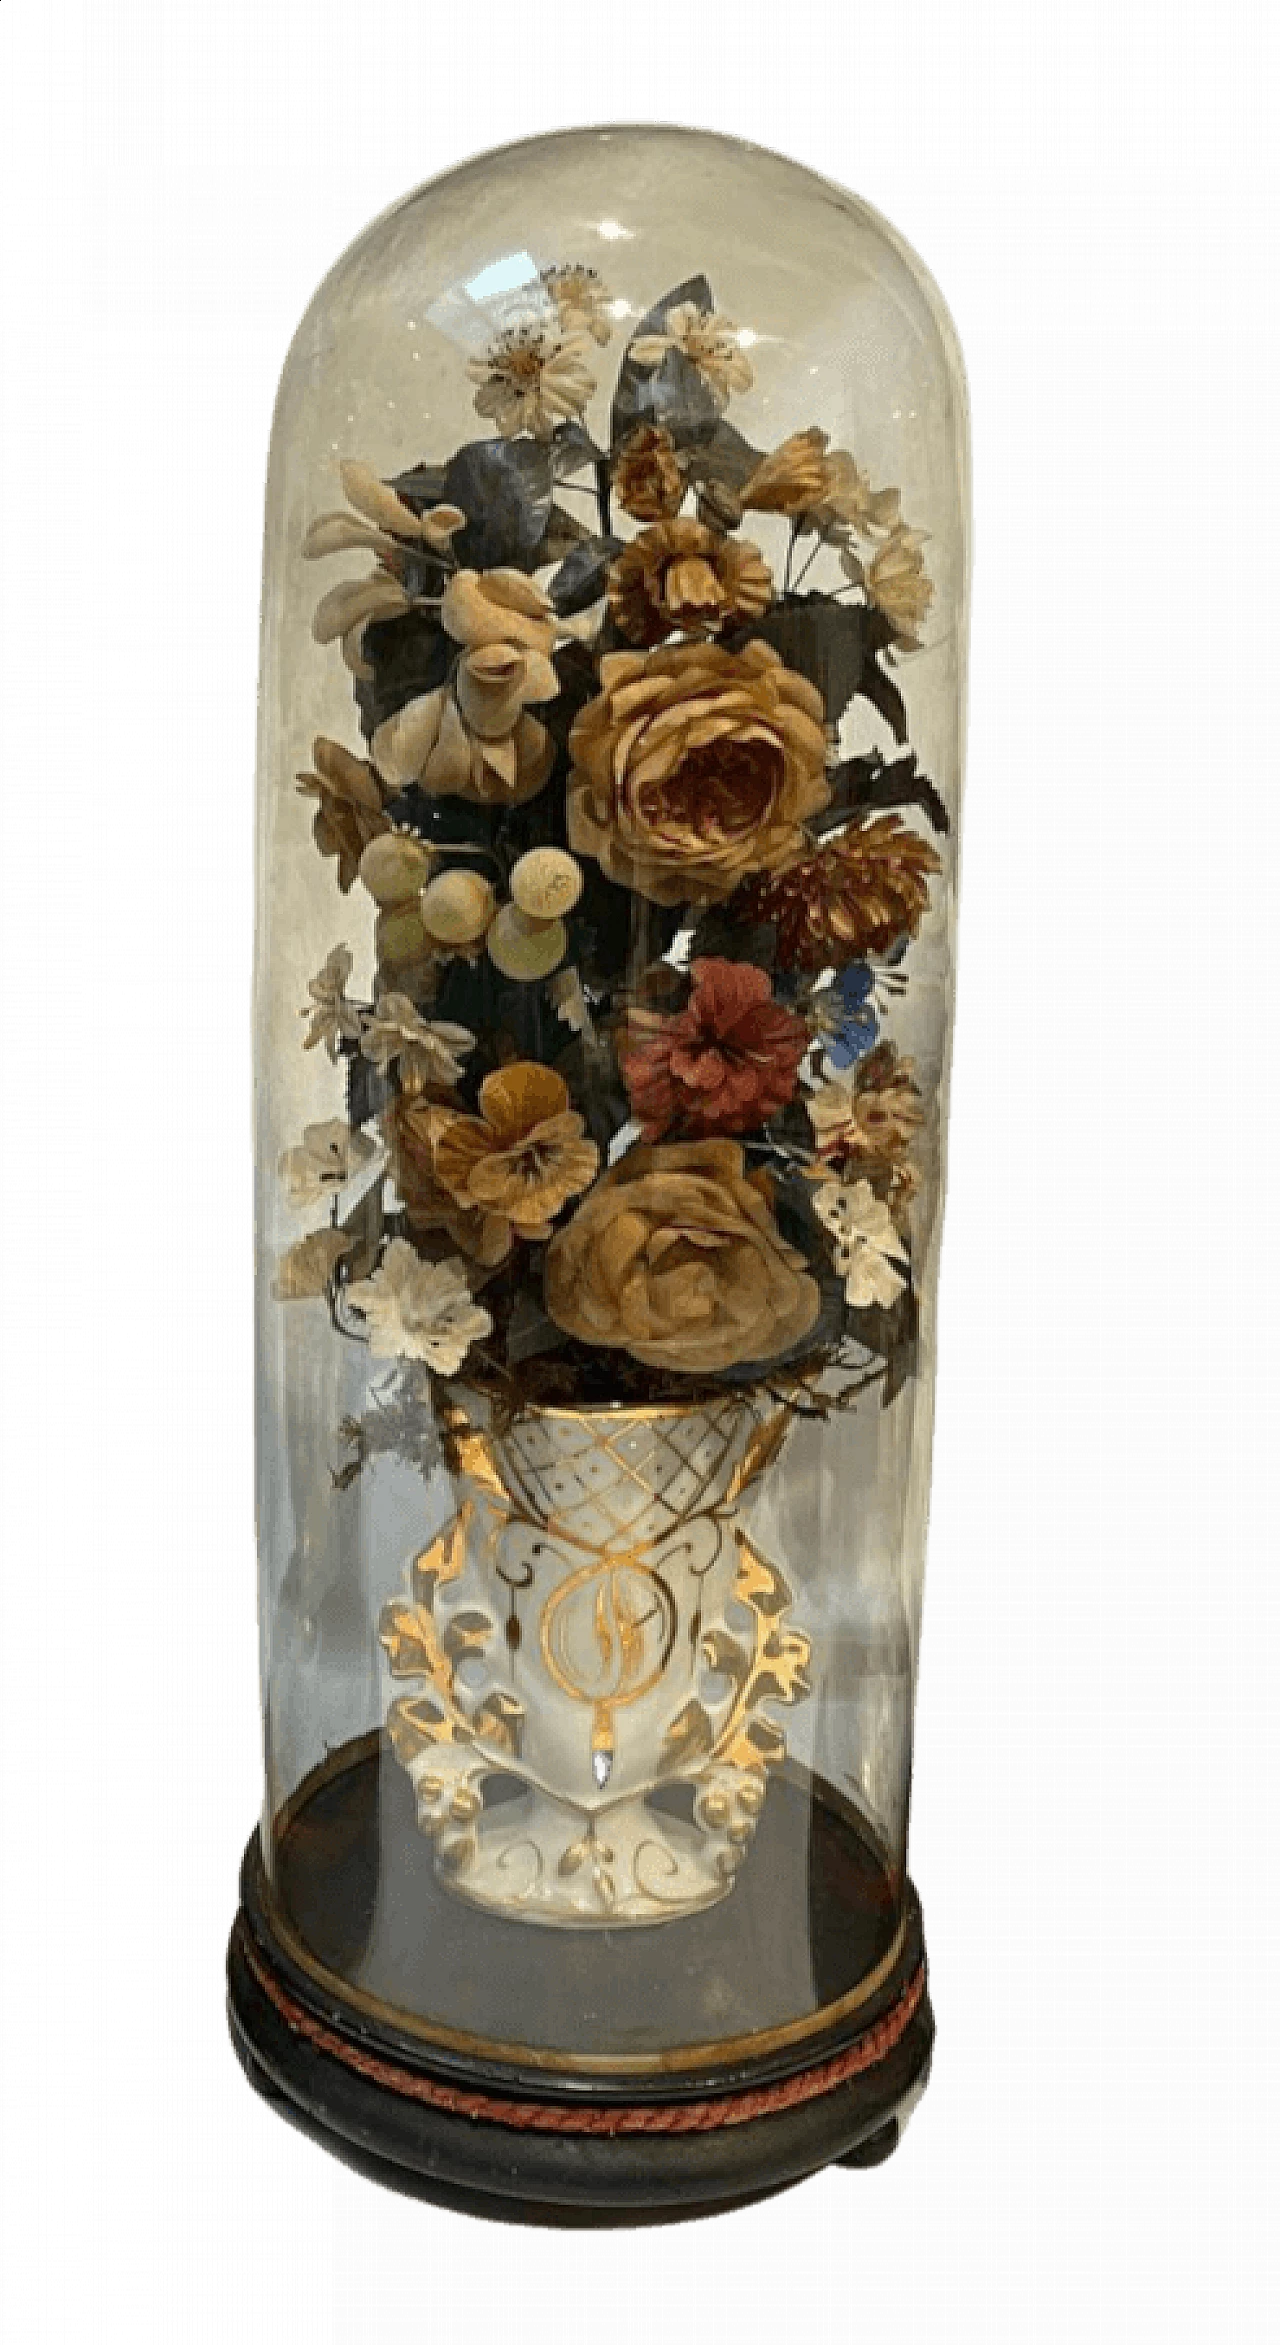 Floral composition in glass display with ceramic vase or cornucopia, 19th century 6